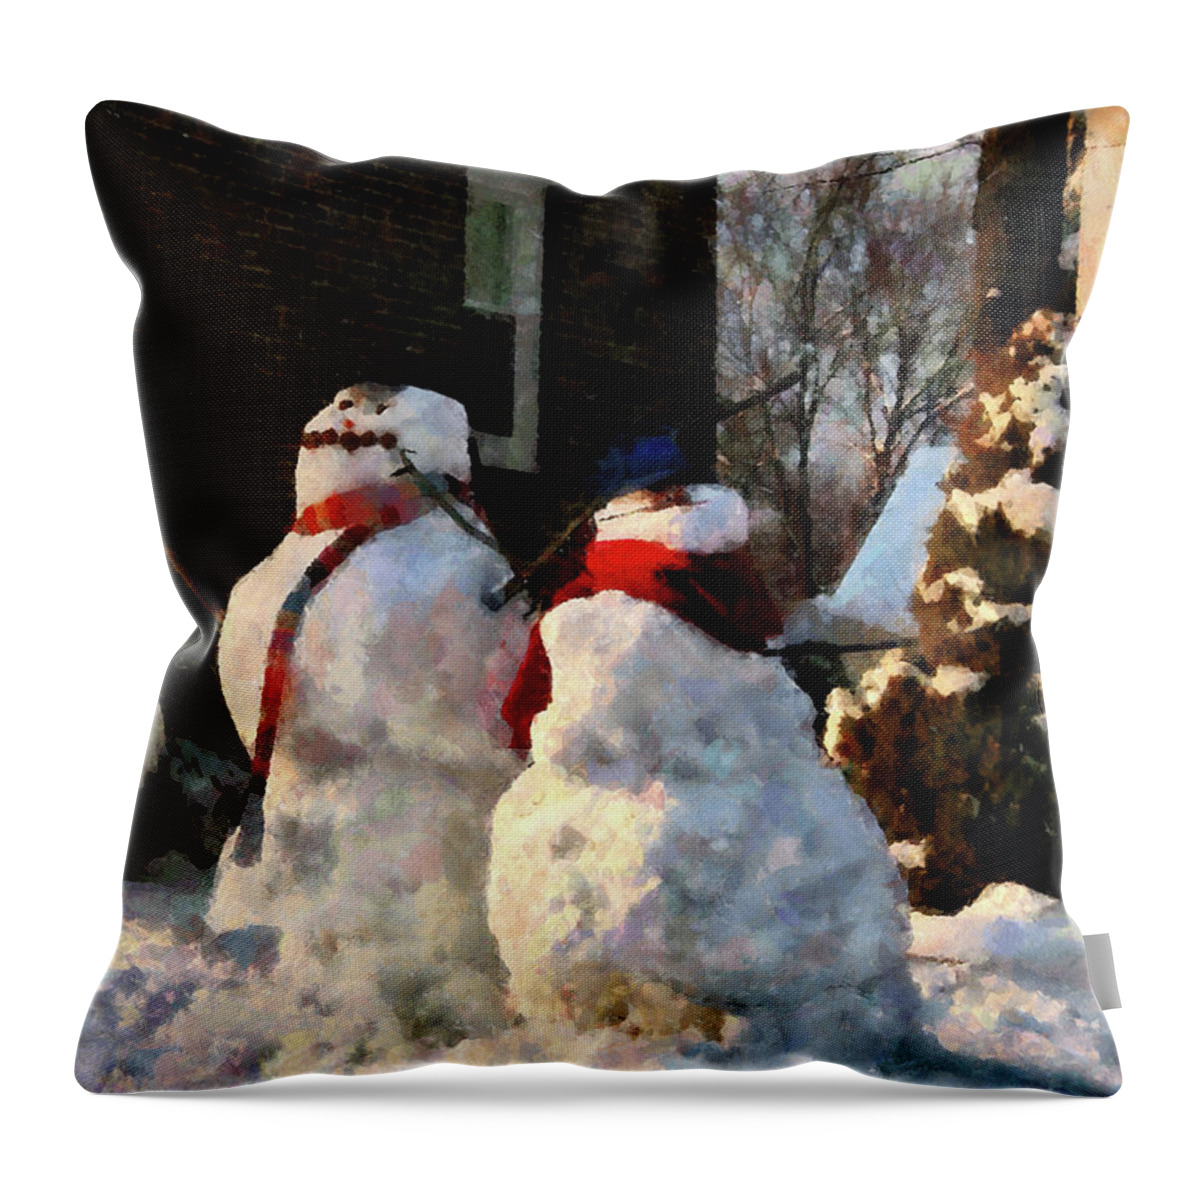 Winter Throw Pillow featuring the photograph Snow Couple by Susan Savad